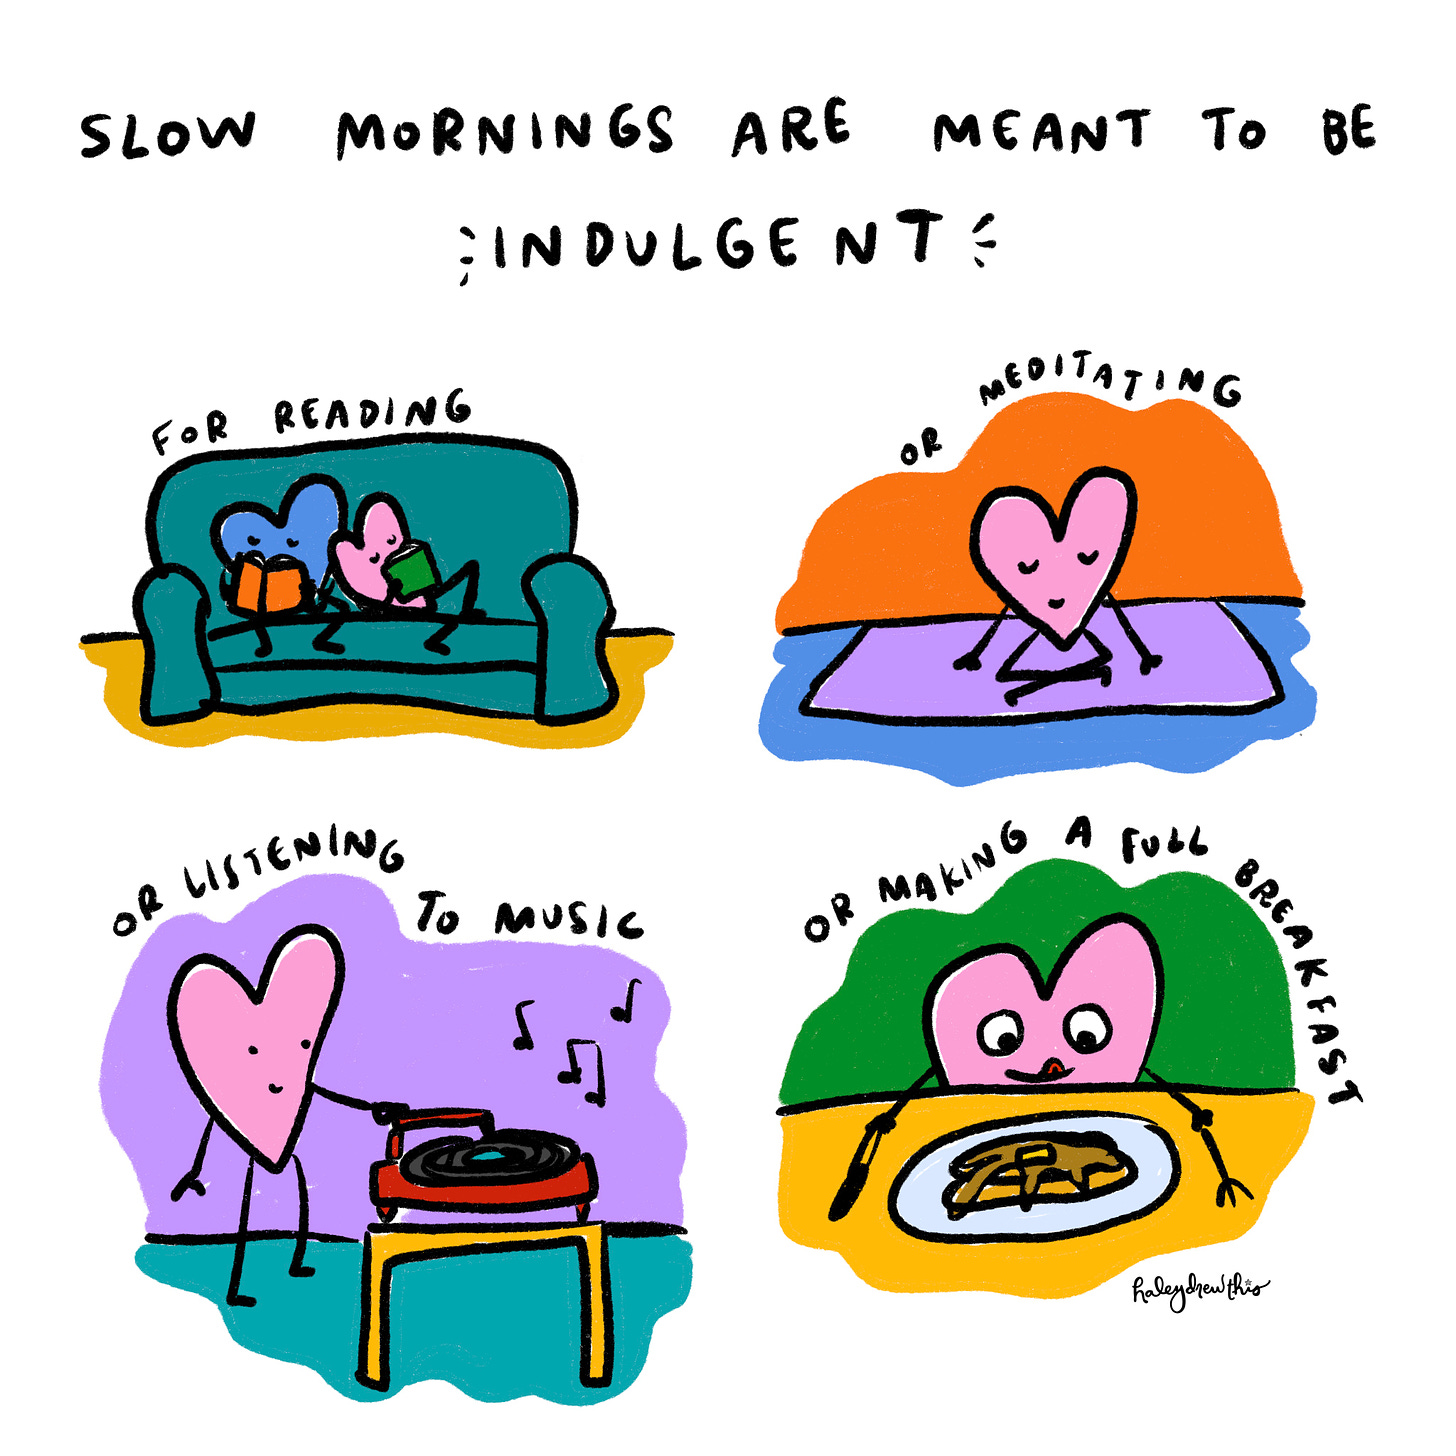  Slow mornings are supposed to be indulgent. (reading books, doing yoga, listening to music, cuddling)